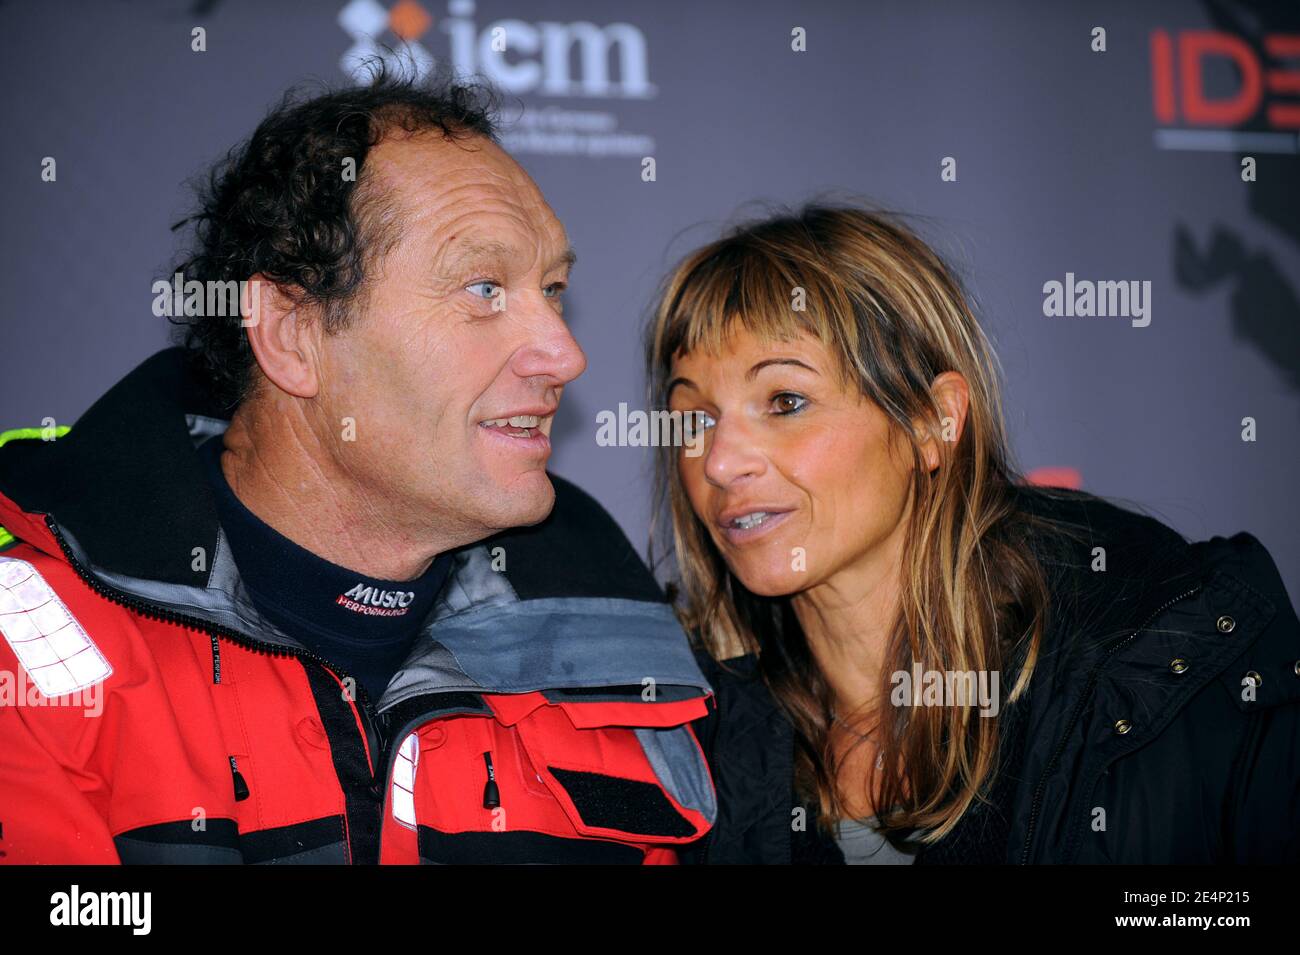 Francis Joyon and his wife. The French navigator arrives at Brest and  becomes the fastest world solo navigator on his maxi-trimaran 'IDEC II'. He  sets a blistering new record of 72 days